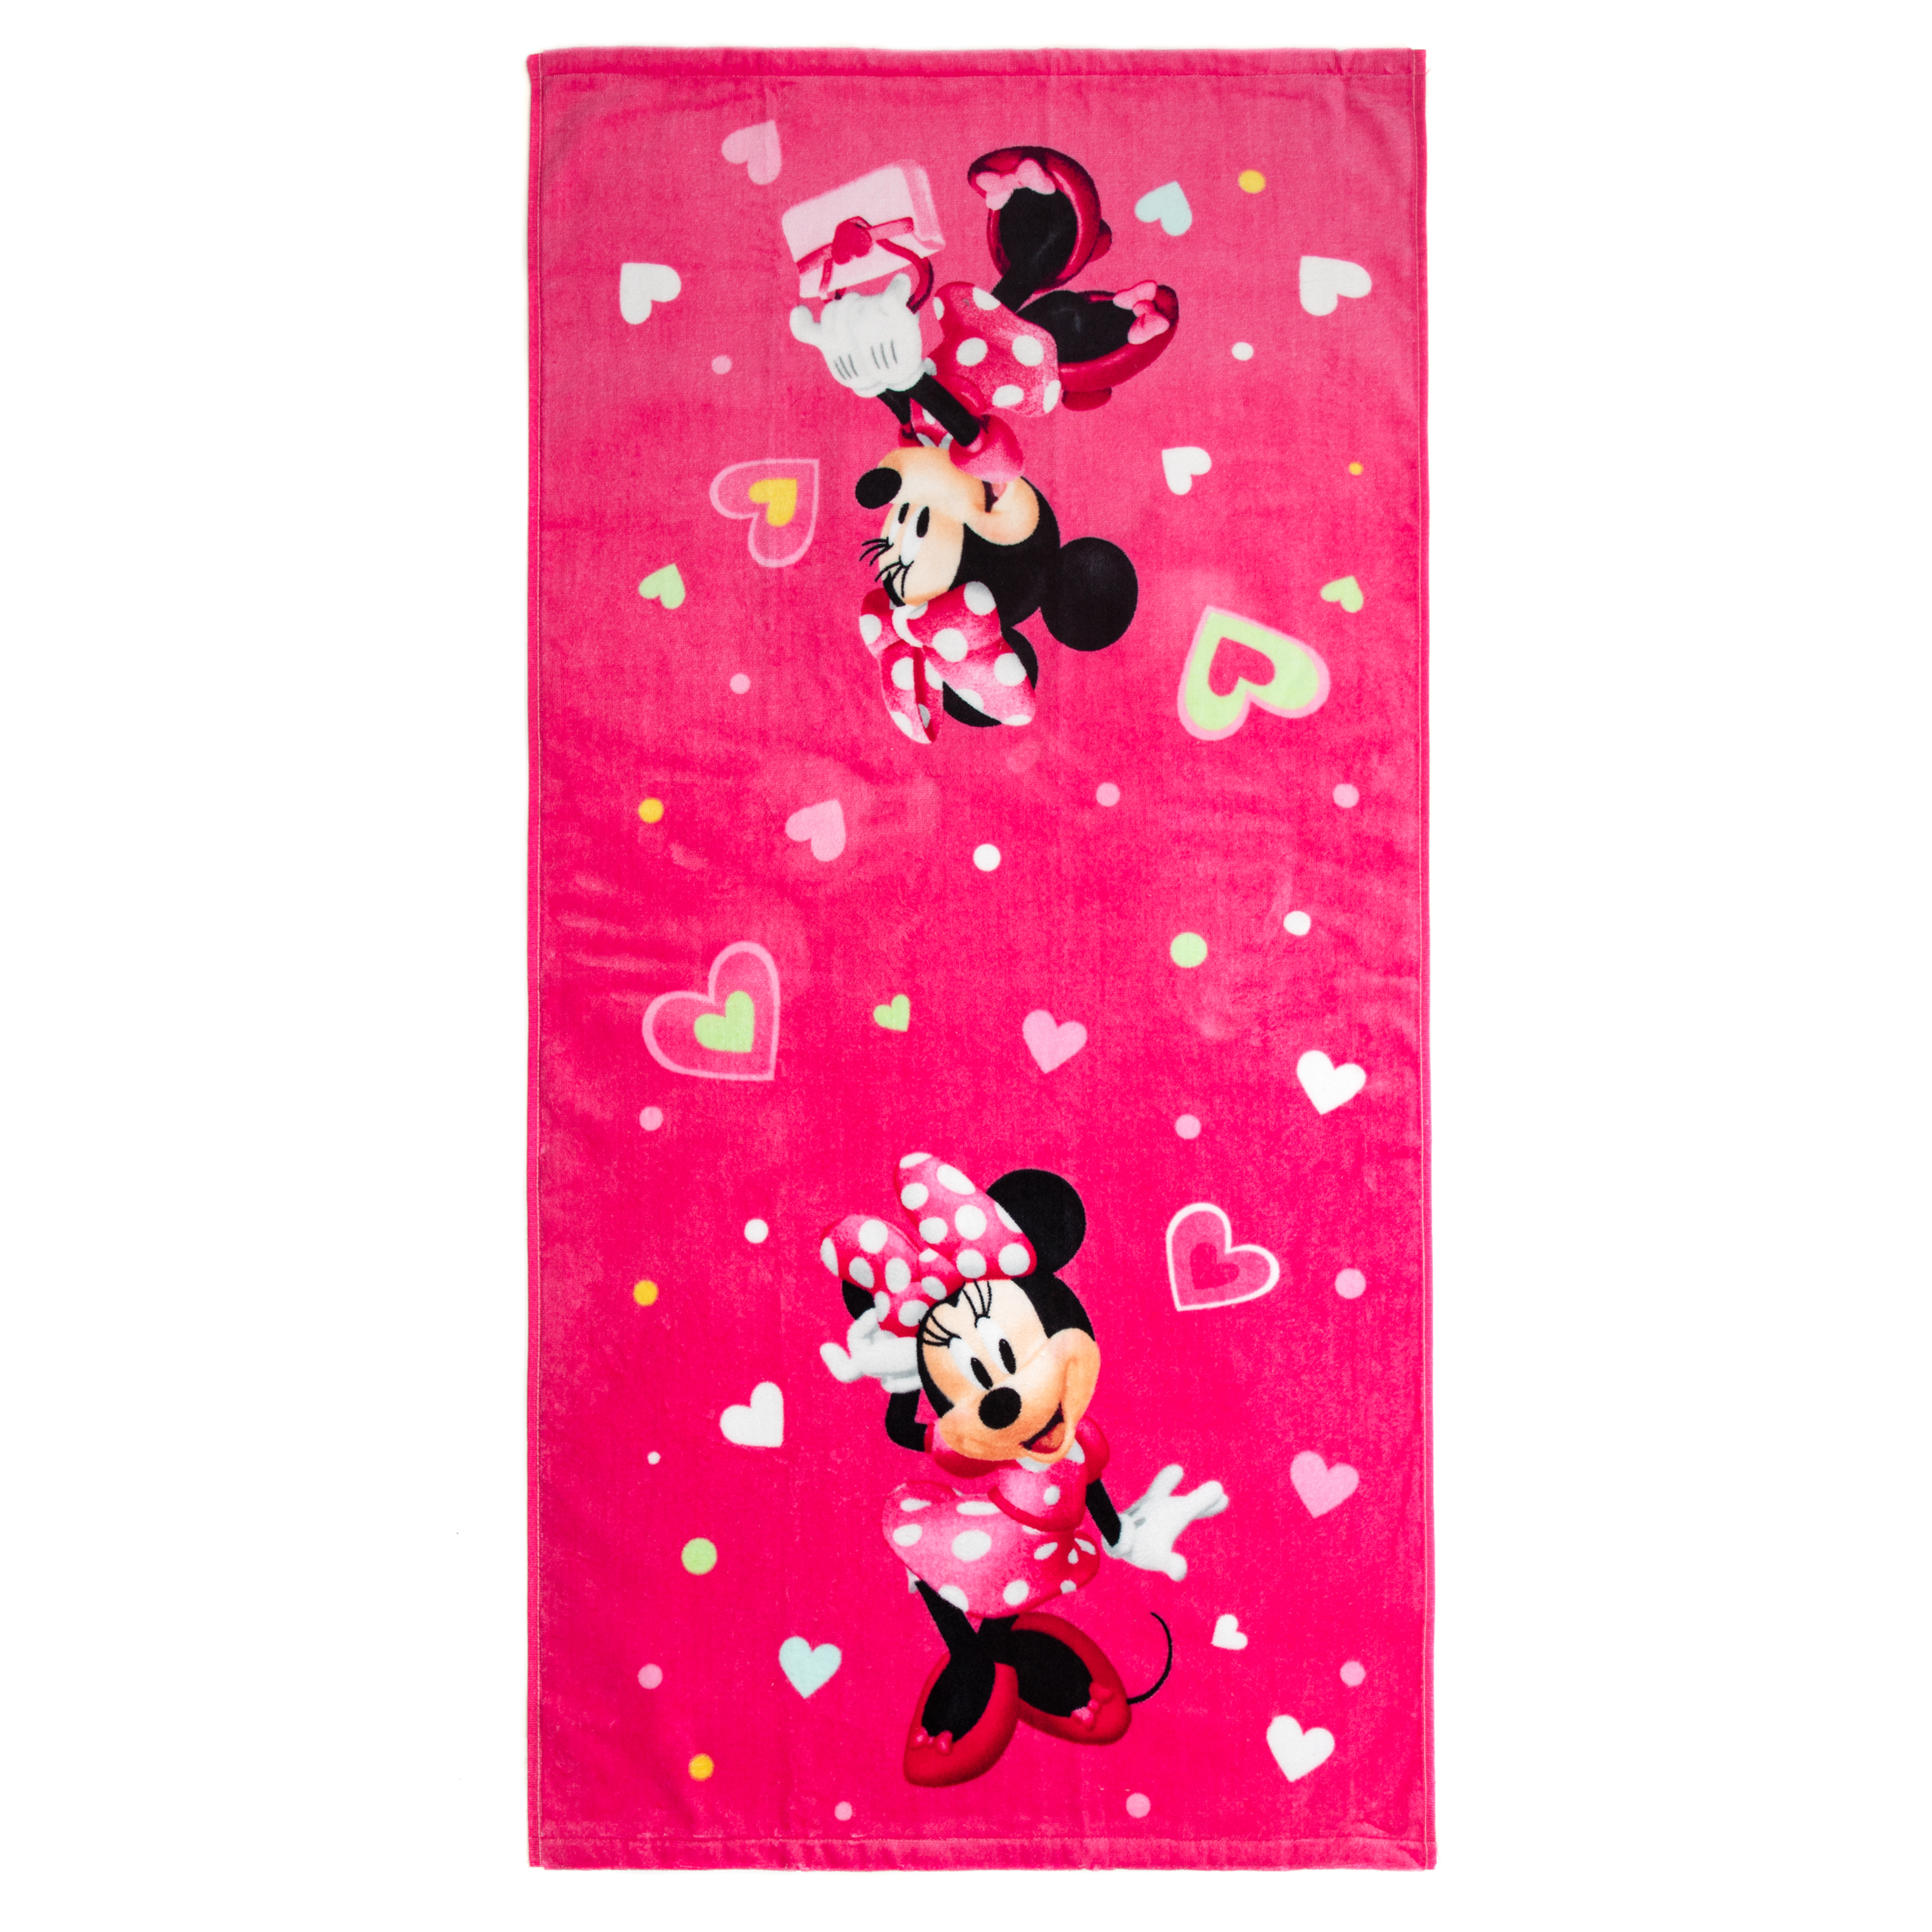 Minnie Mouse Kids Cotton 2 Piece Towel and Washcloth Set - image 3 of 8